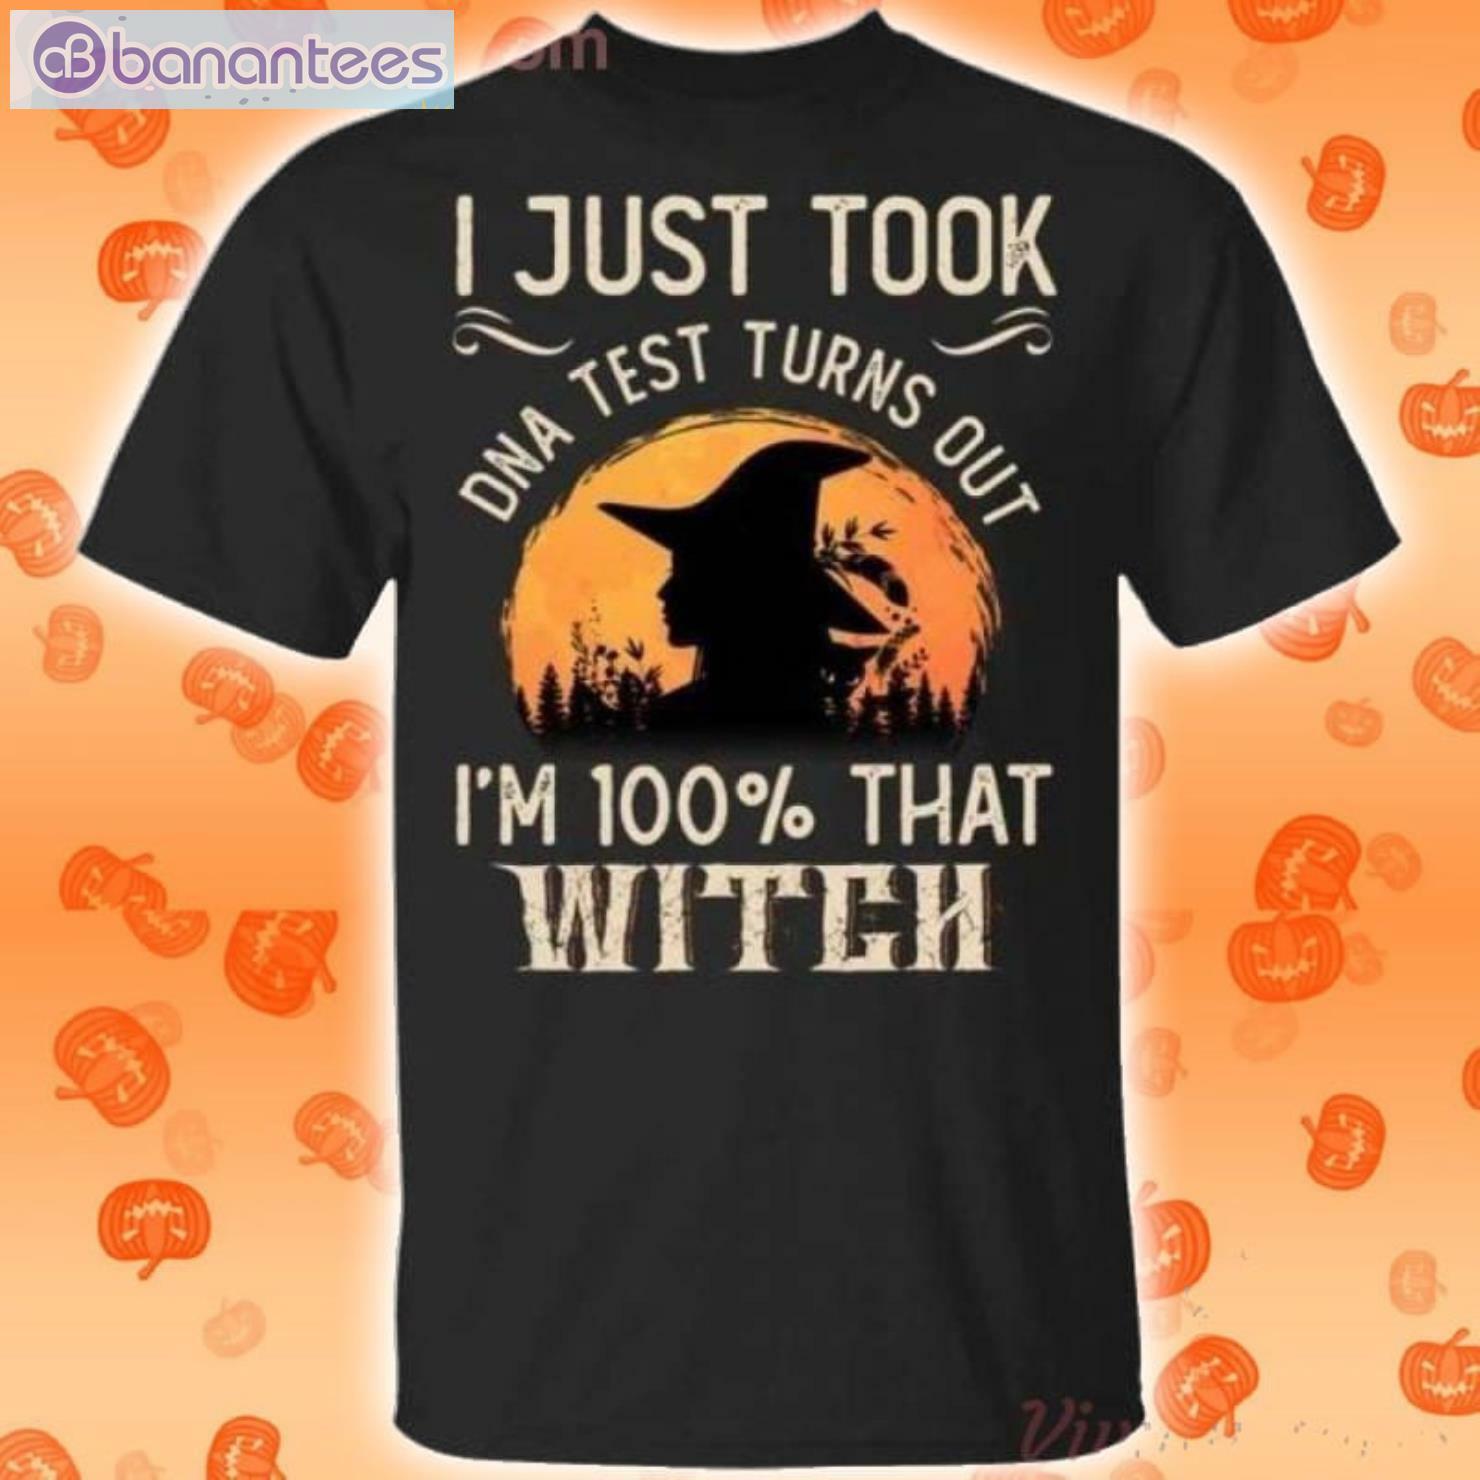 I Just Took A Dna Test Turns Out I'm 100 Percent That Witch Halloween T Shirt Product Photo